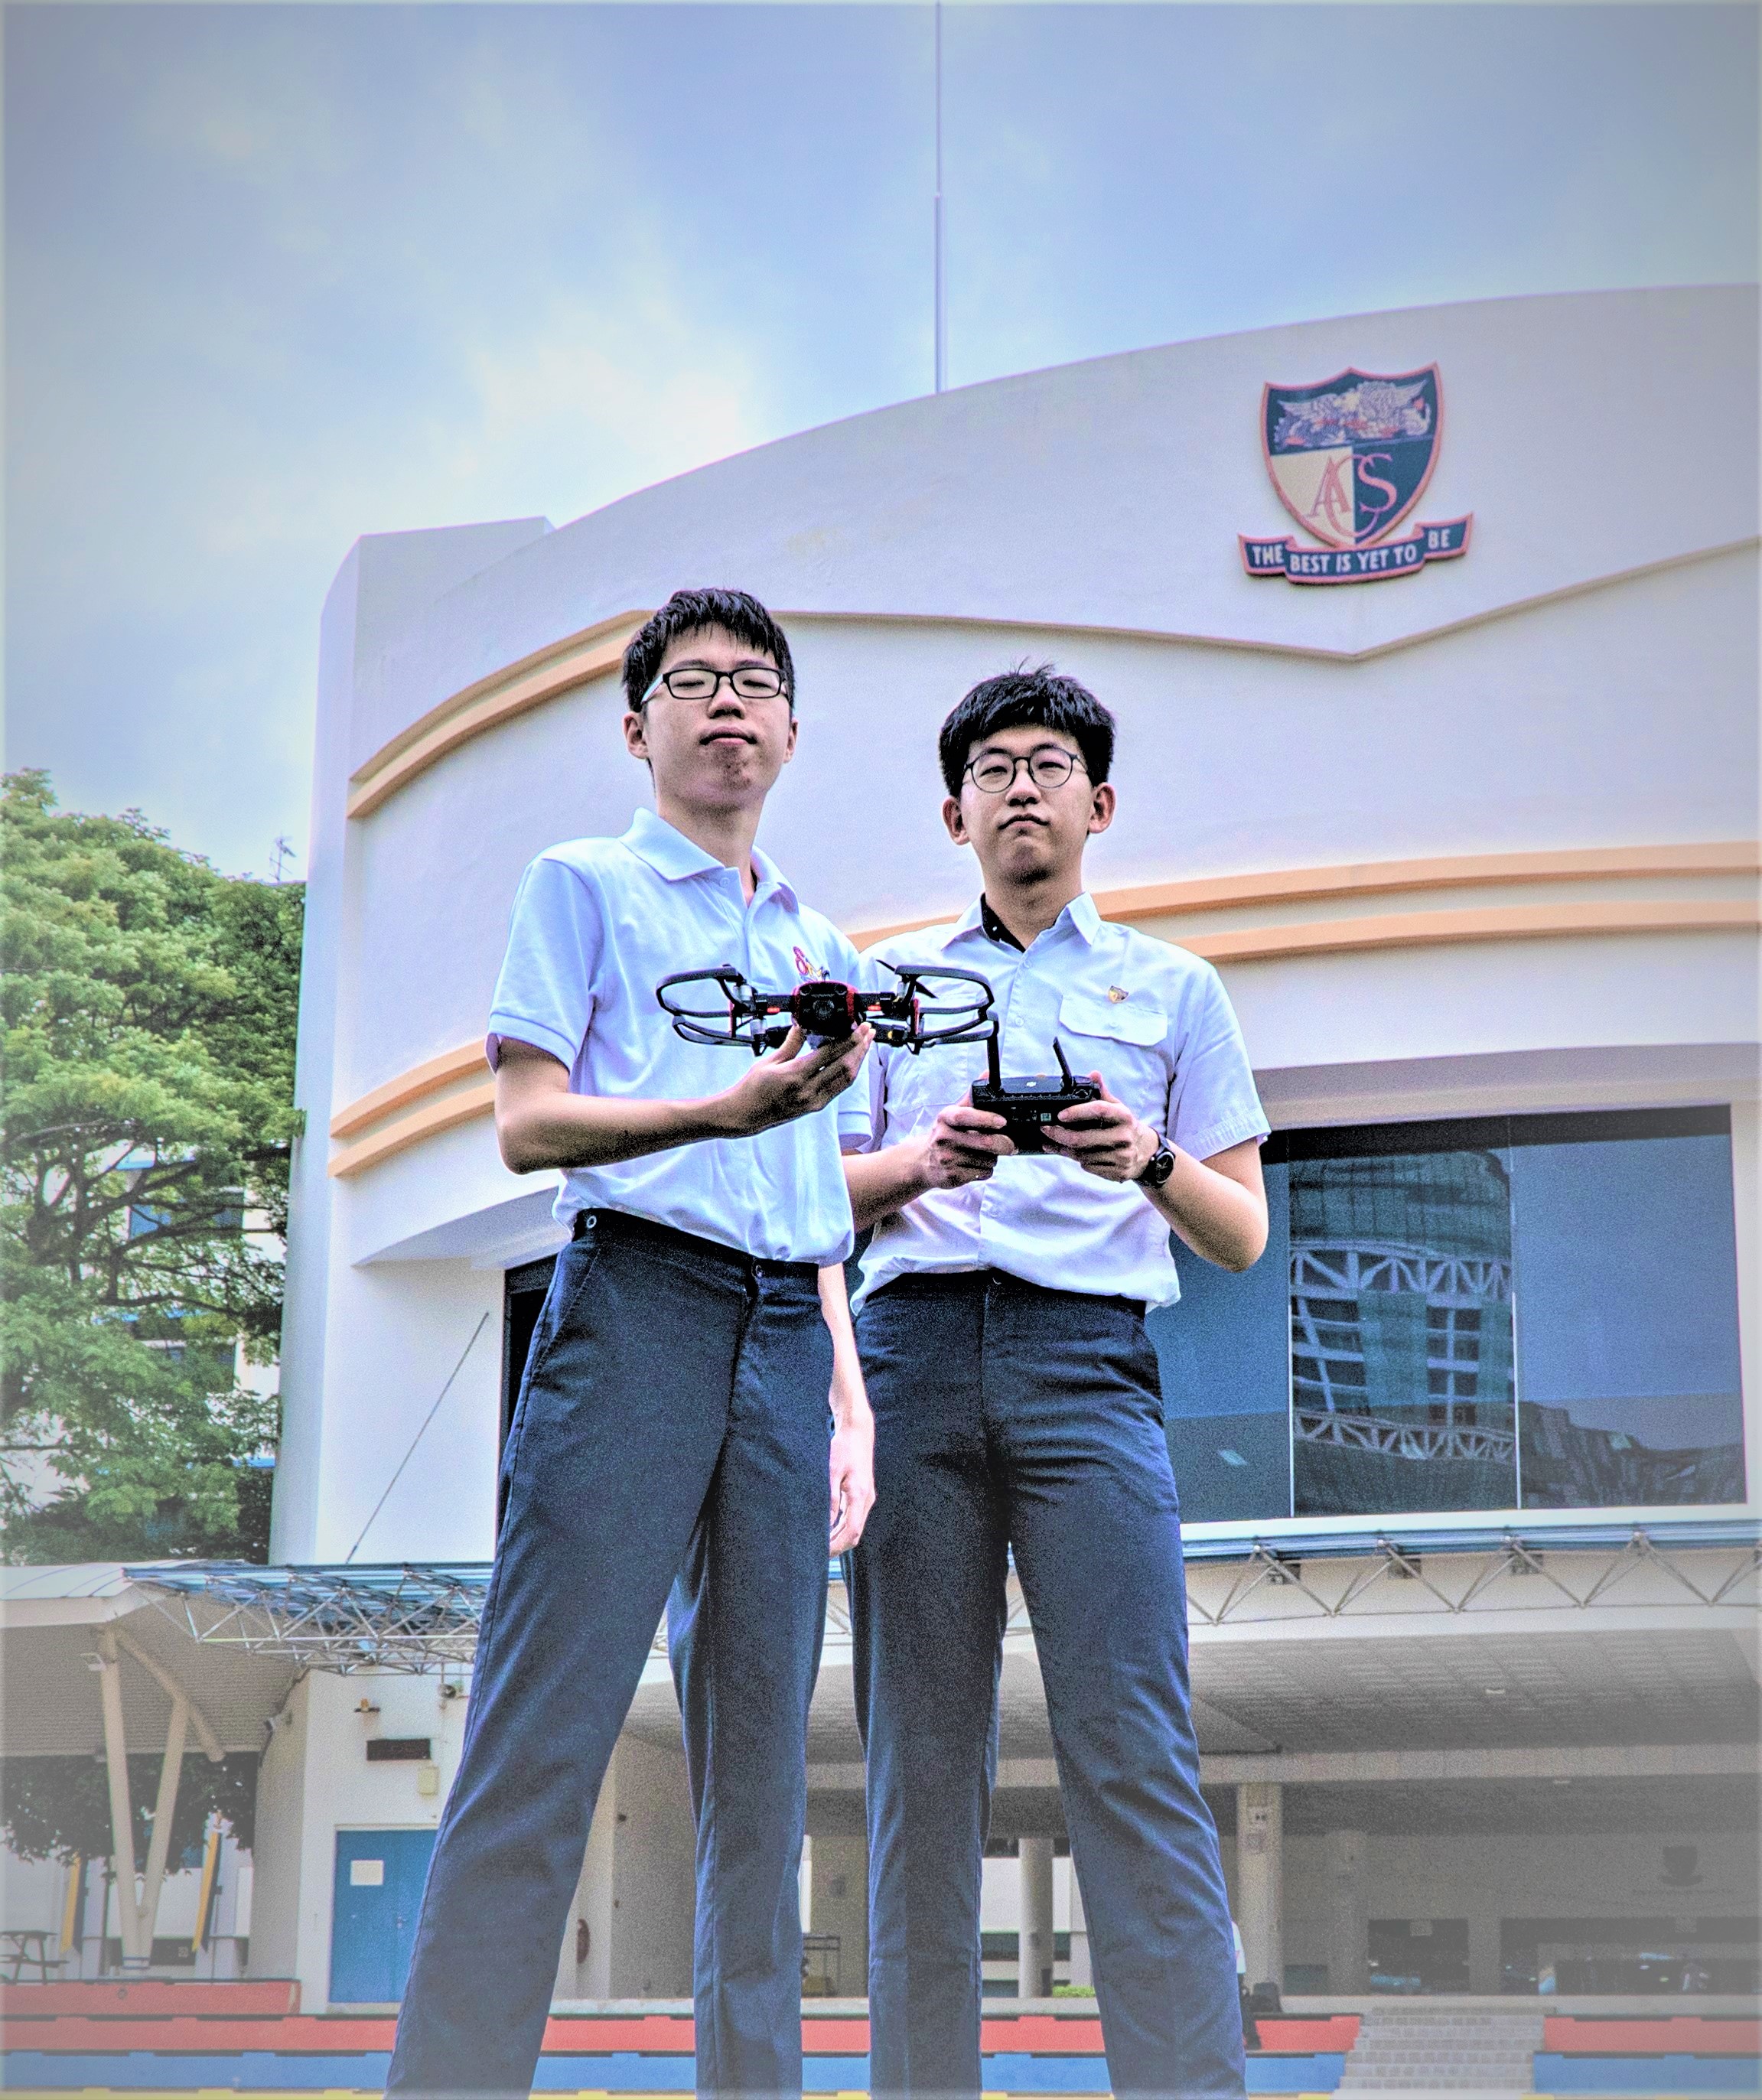 Physics and Engineering Club Leaders